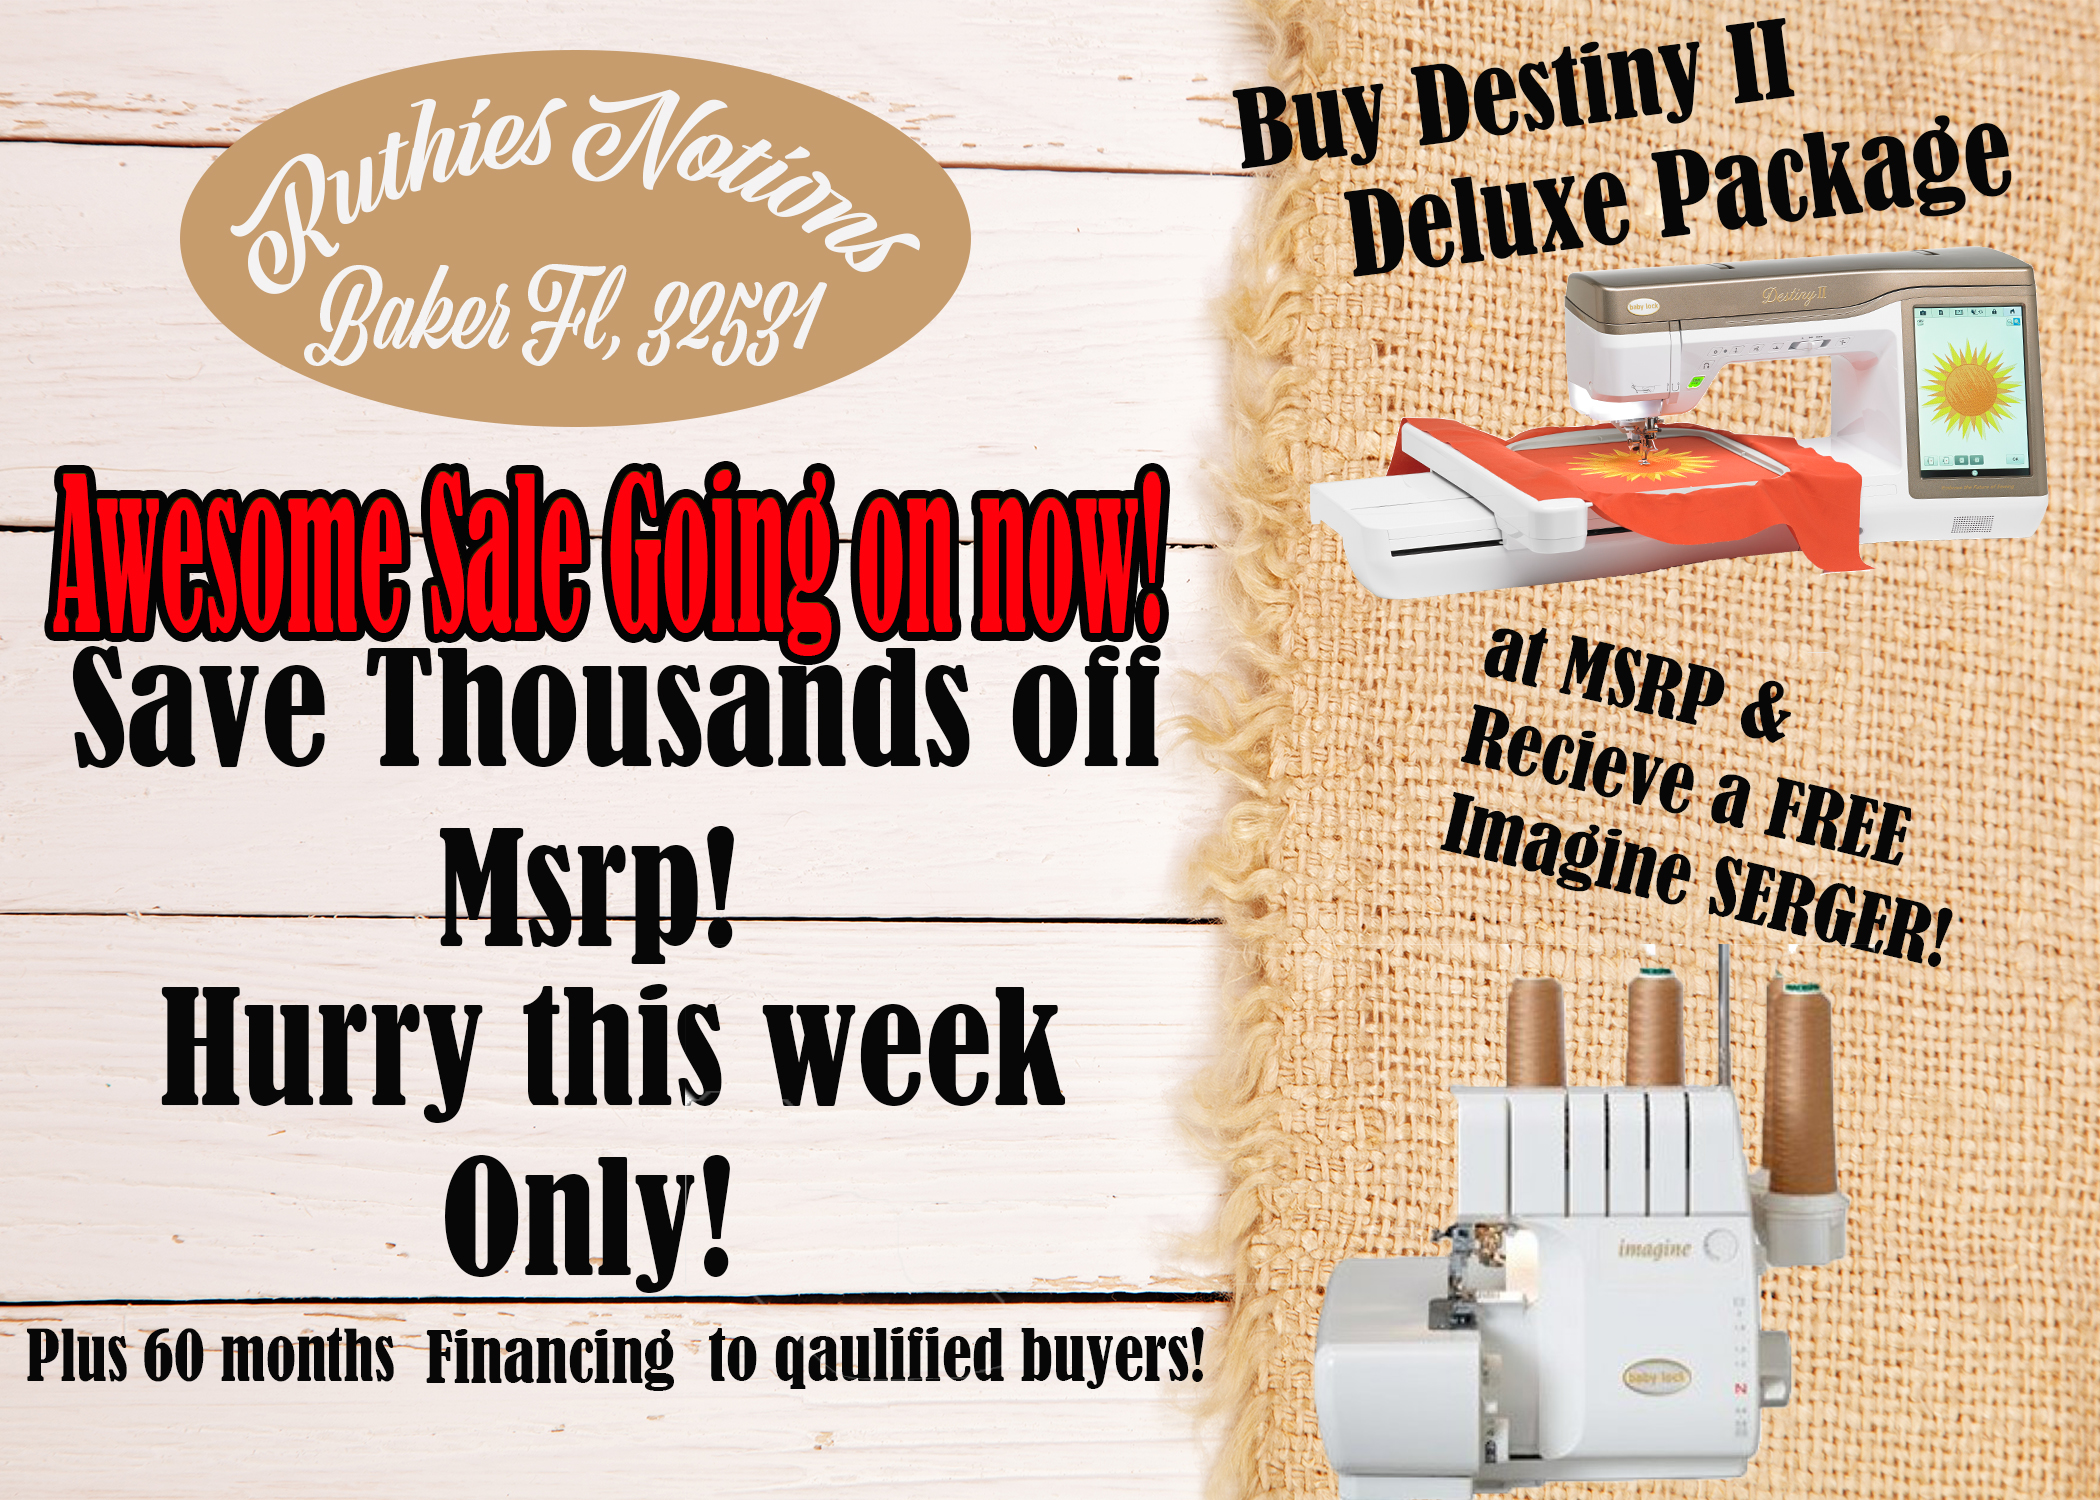 Destiny II and Imagine Serger Package